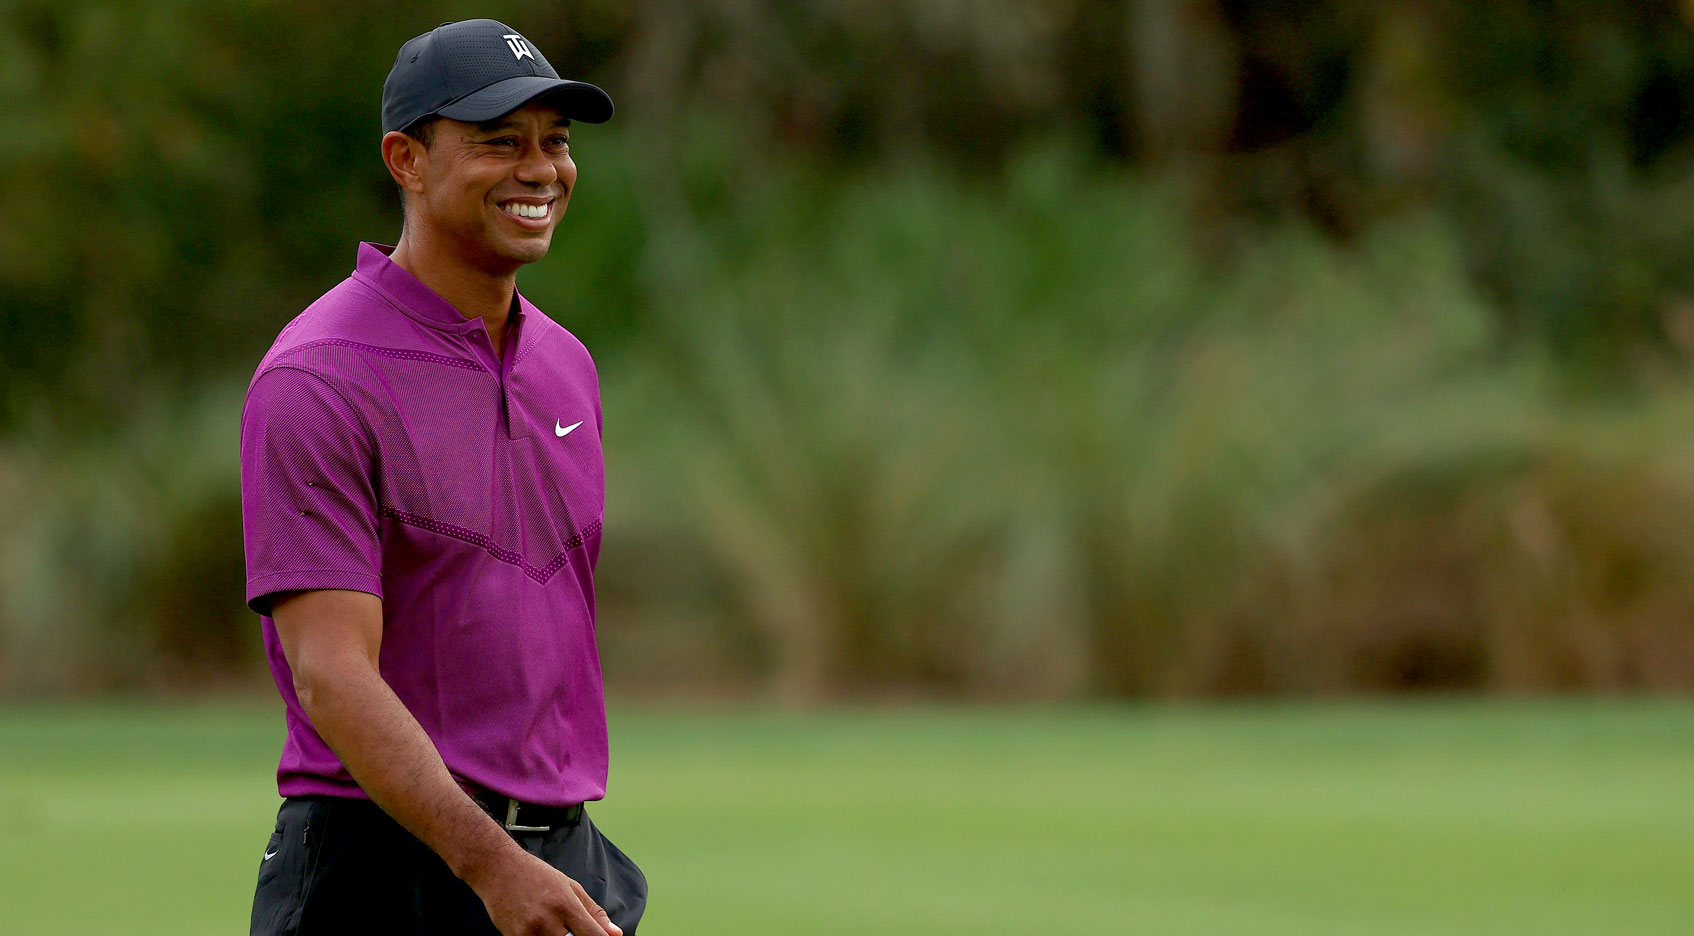 What’s next for Tiger as he turns 45?